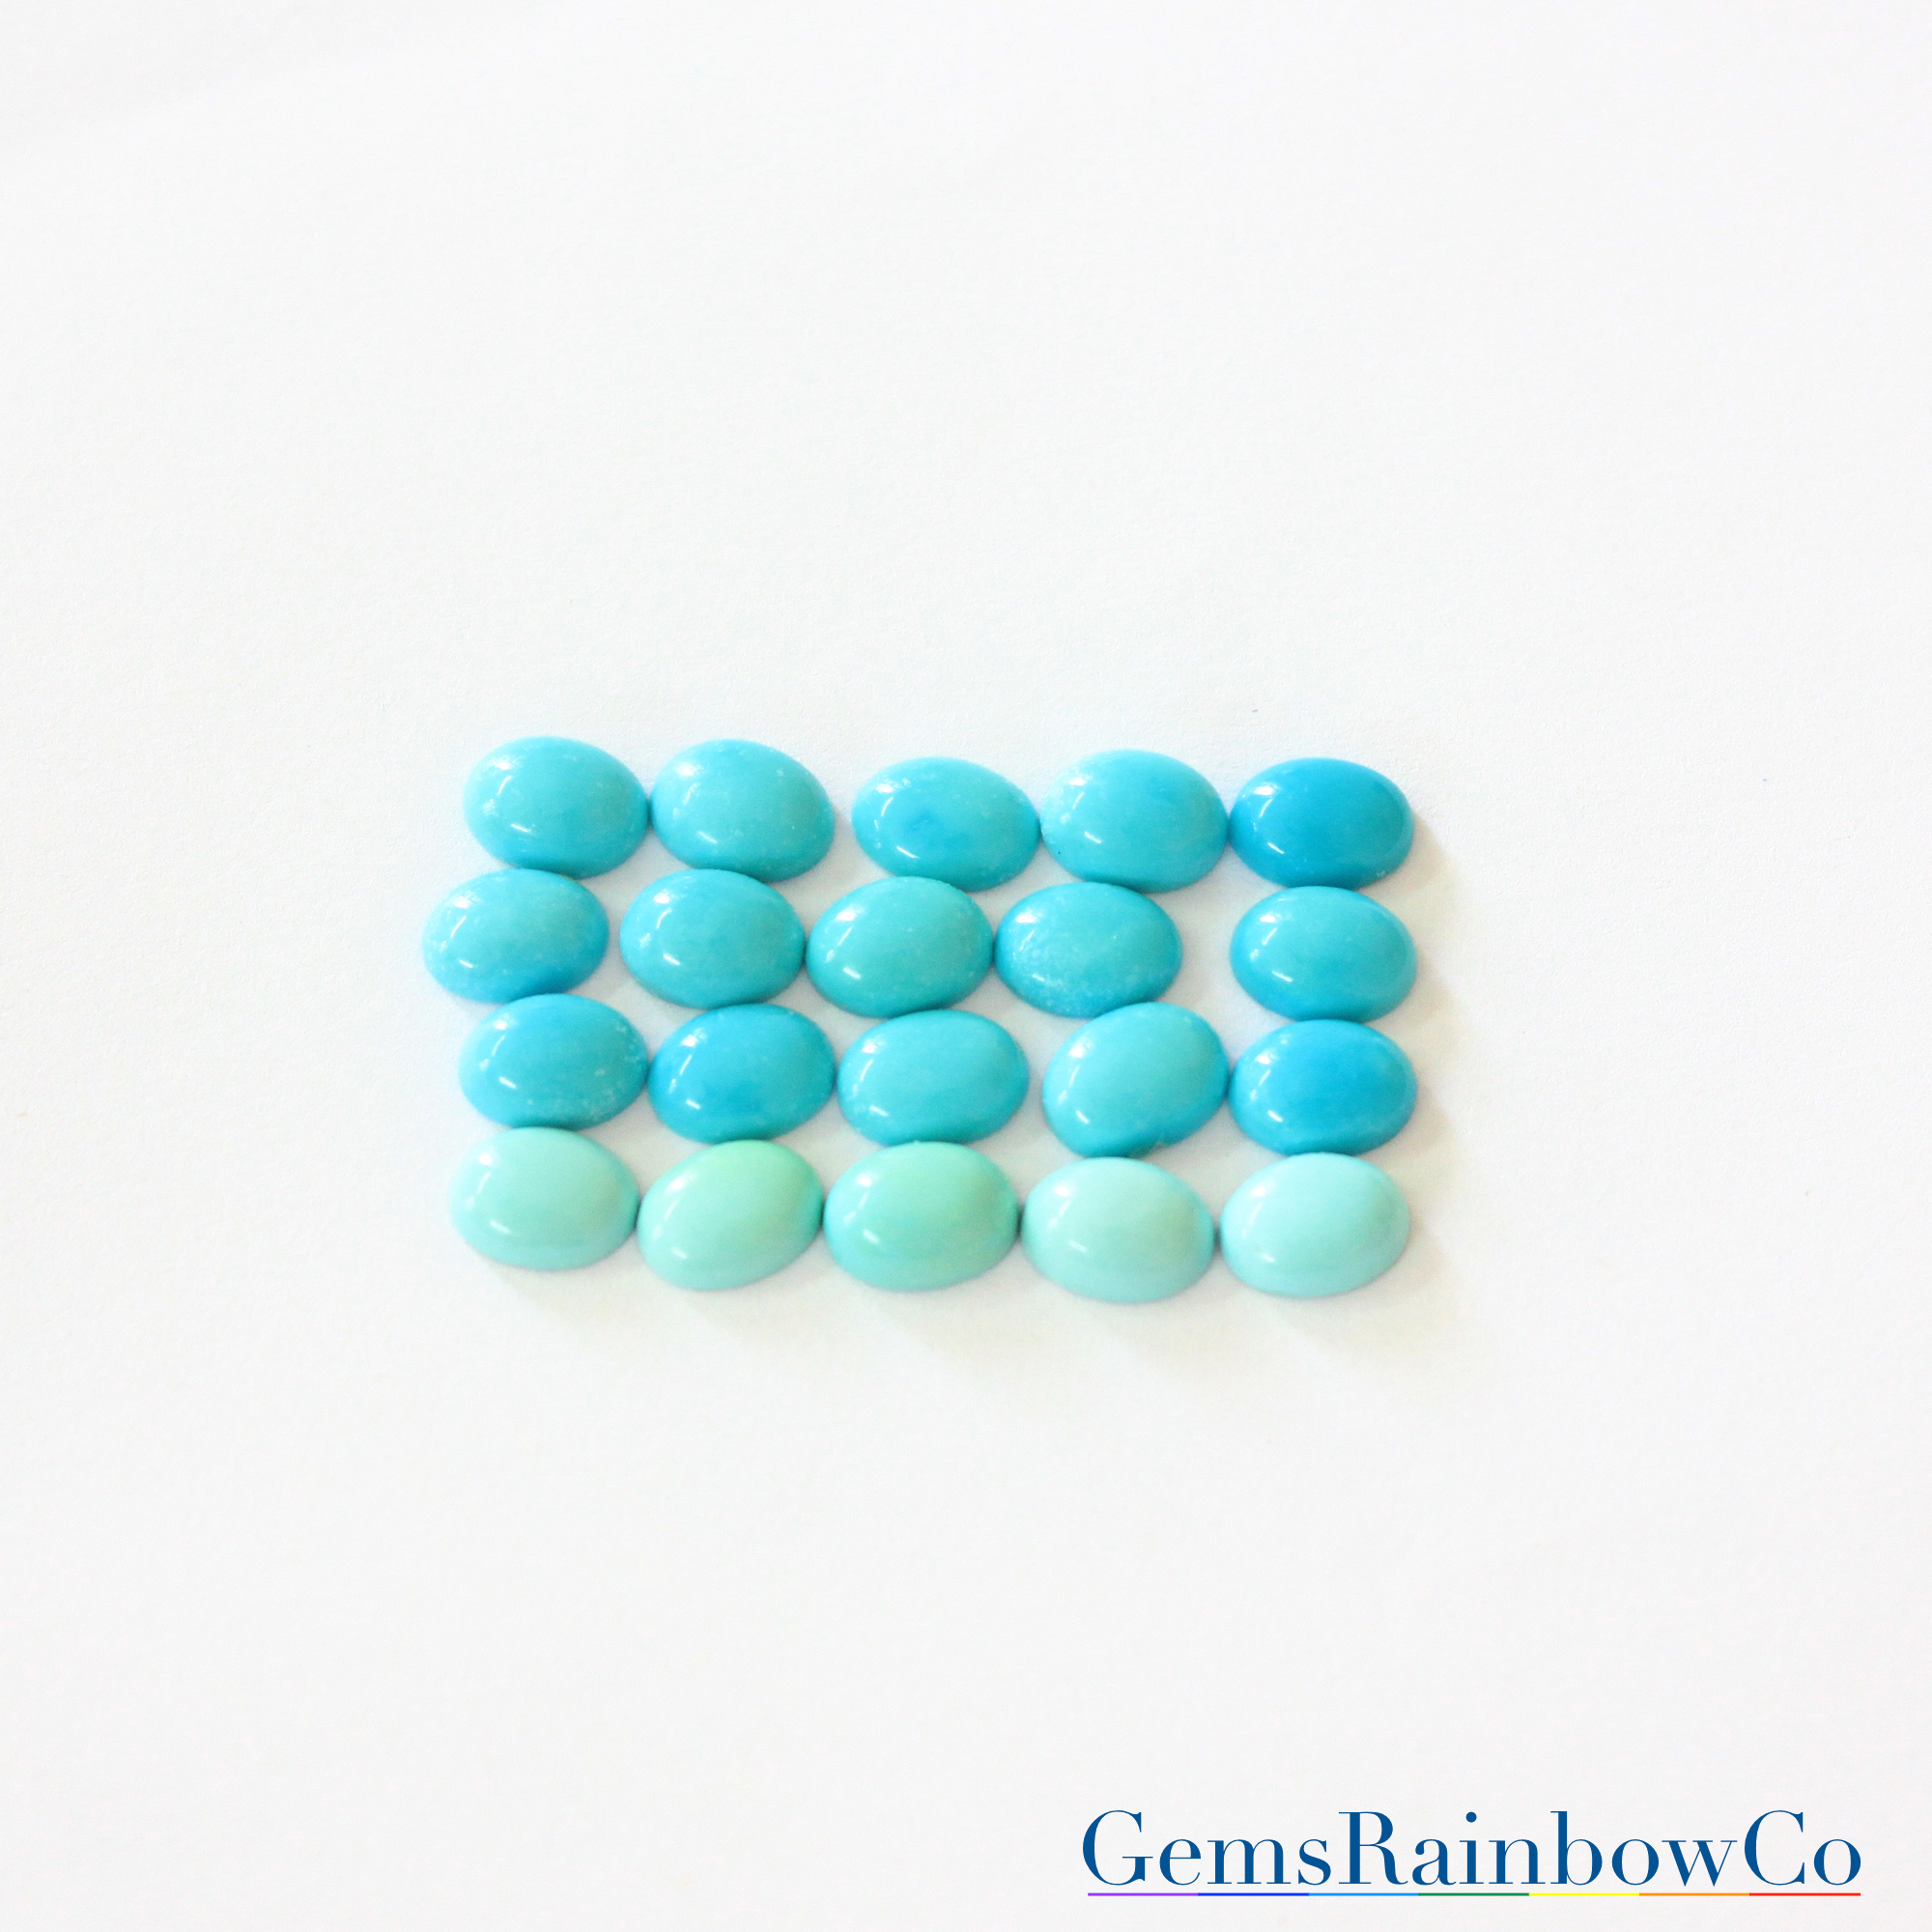 8x6mm Oval Faux Turquoise Stones, Turquoise Cabochons, Oval Cabochons, Jewelry  Making, Western Jewelry, Bezel Setting, Flat Back Stones 